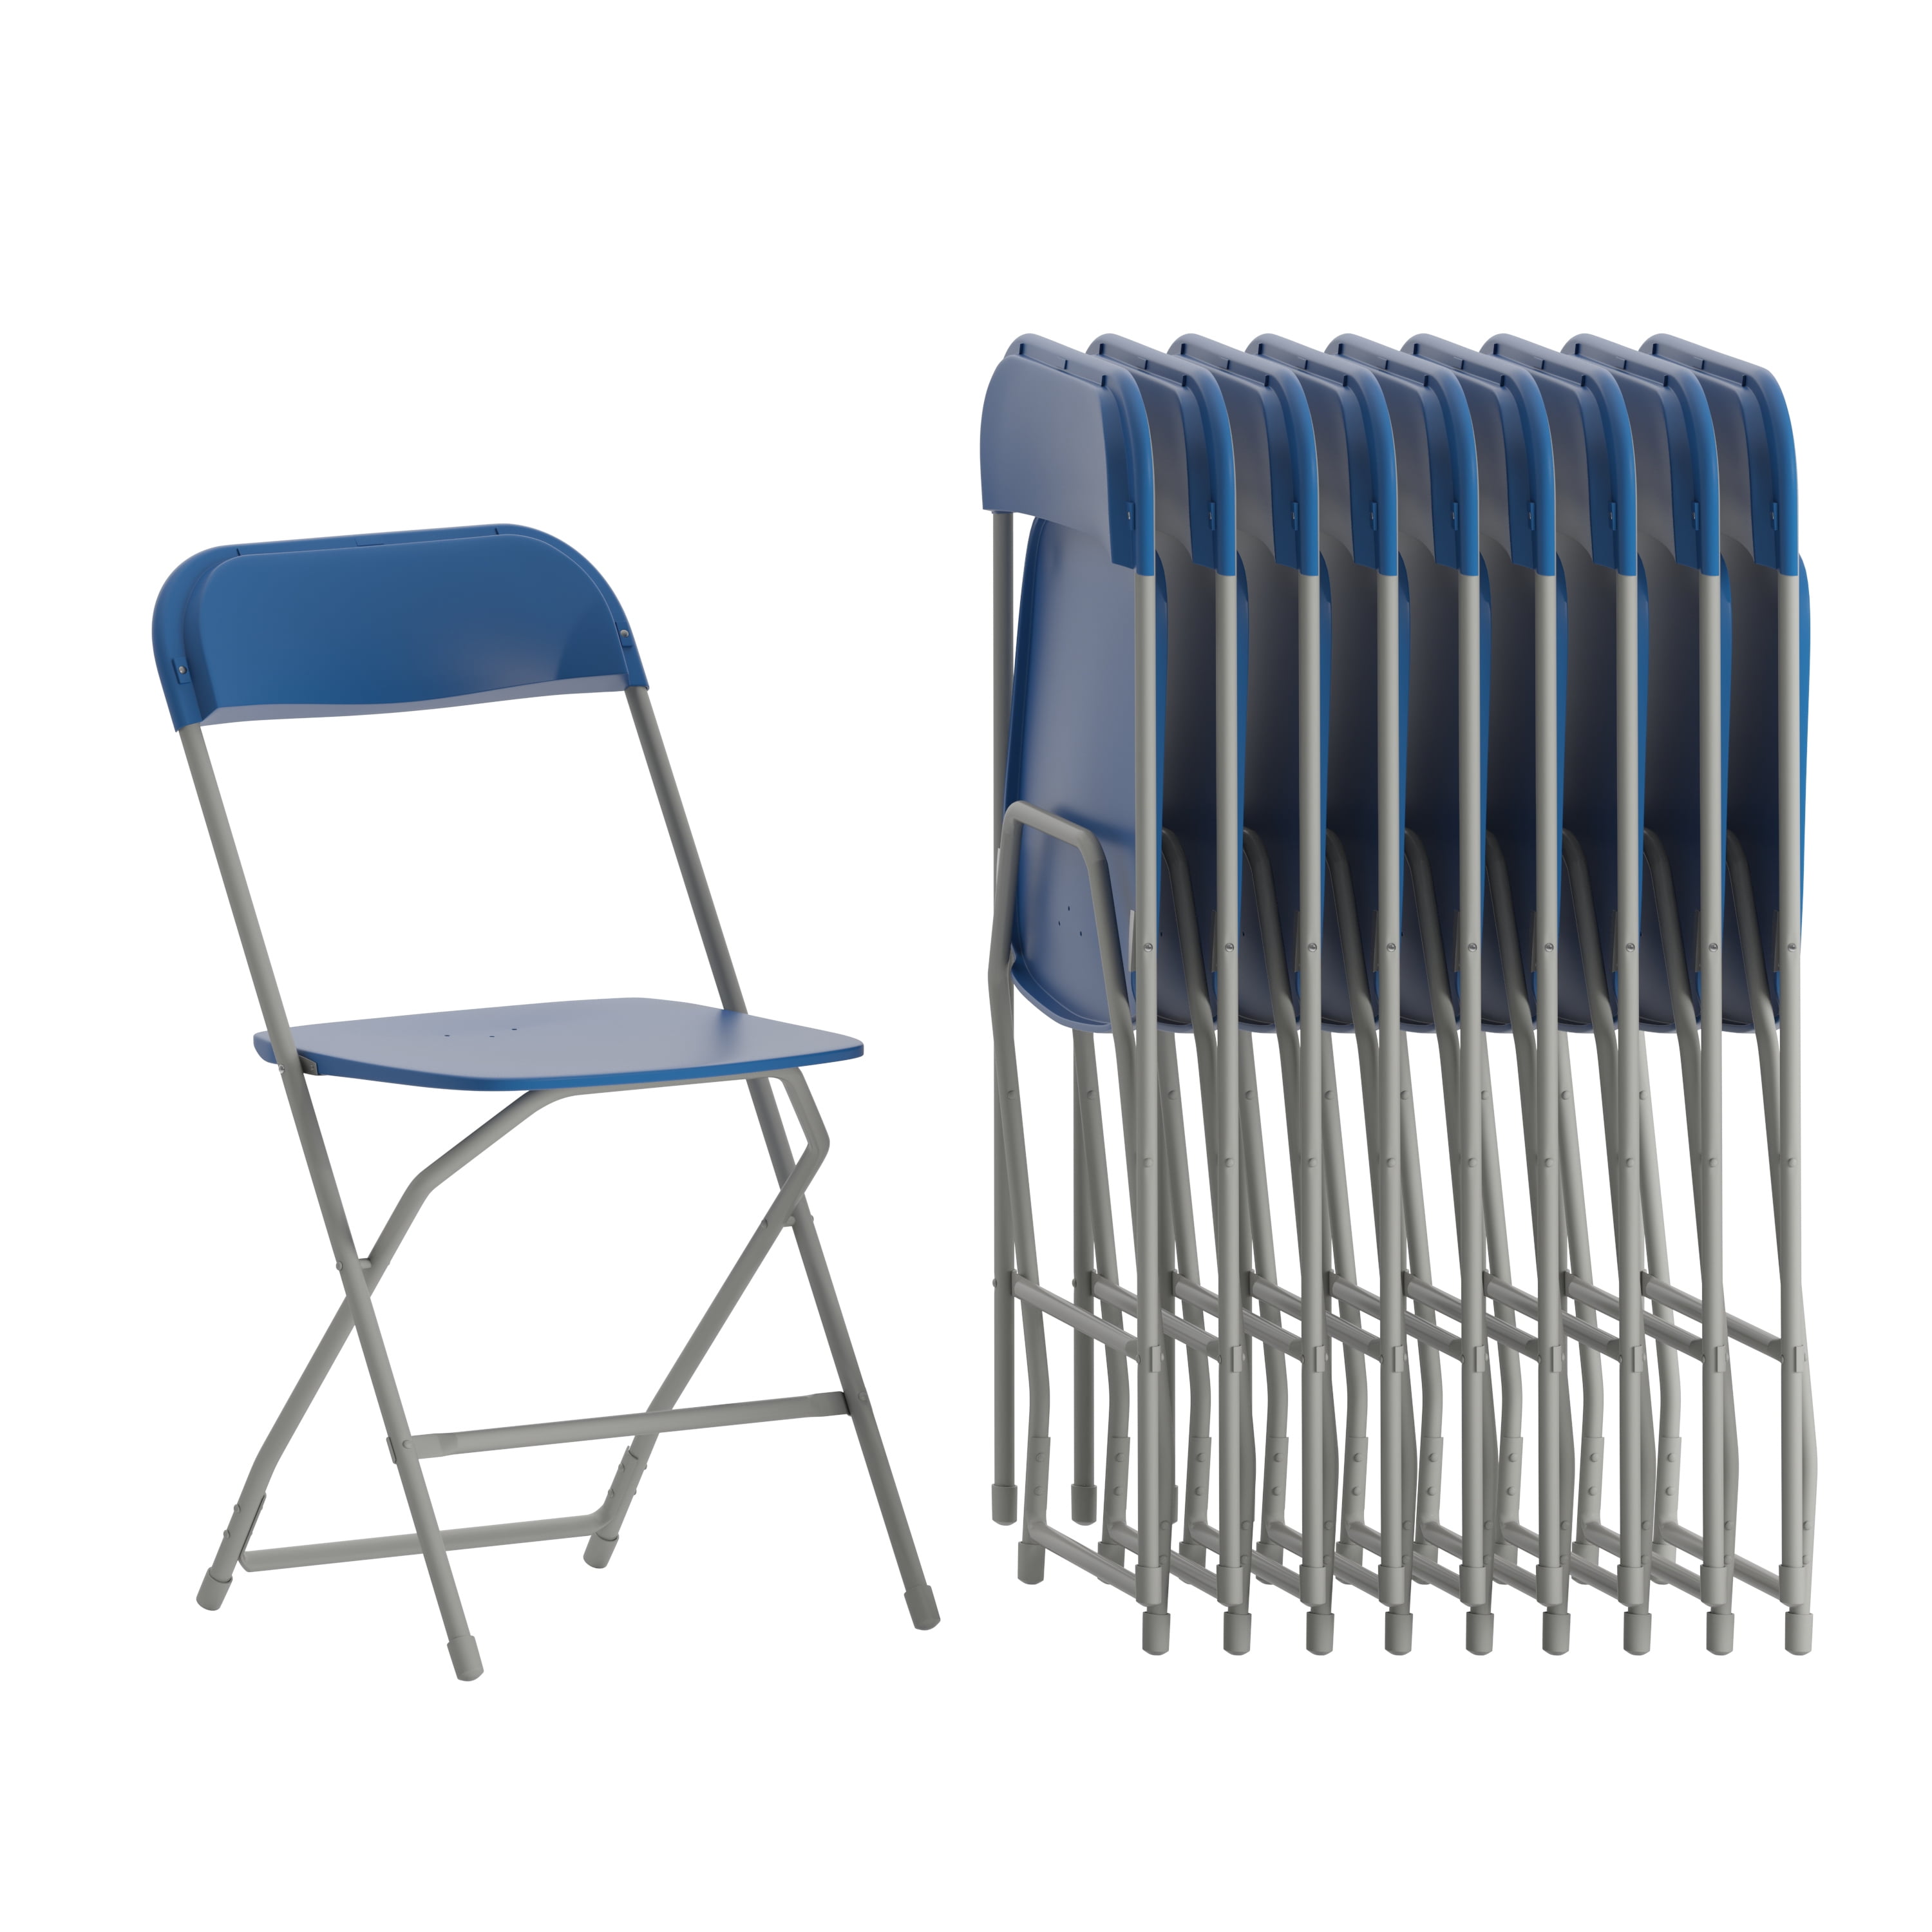 Best Affordable Folding Office Chair: X-Chair X-Stack Review